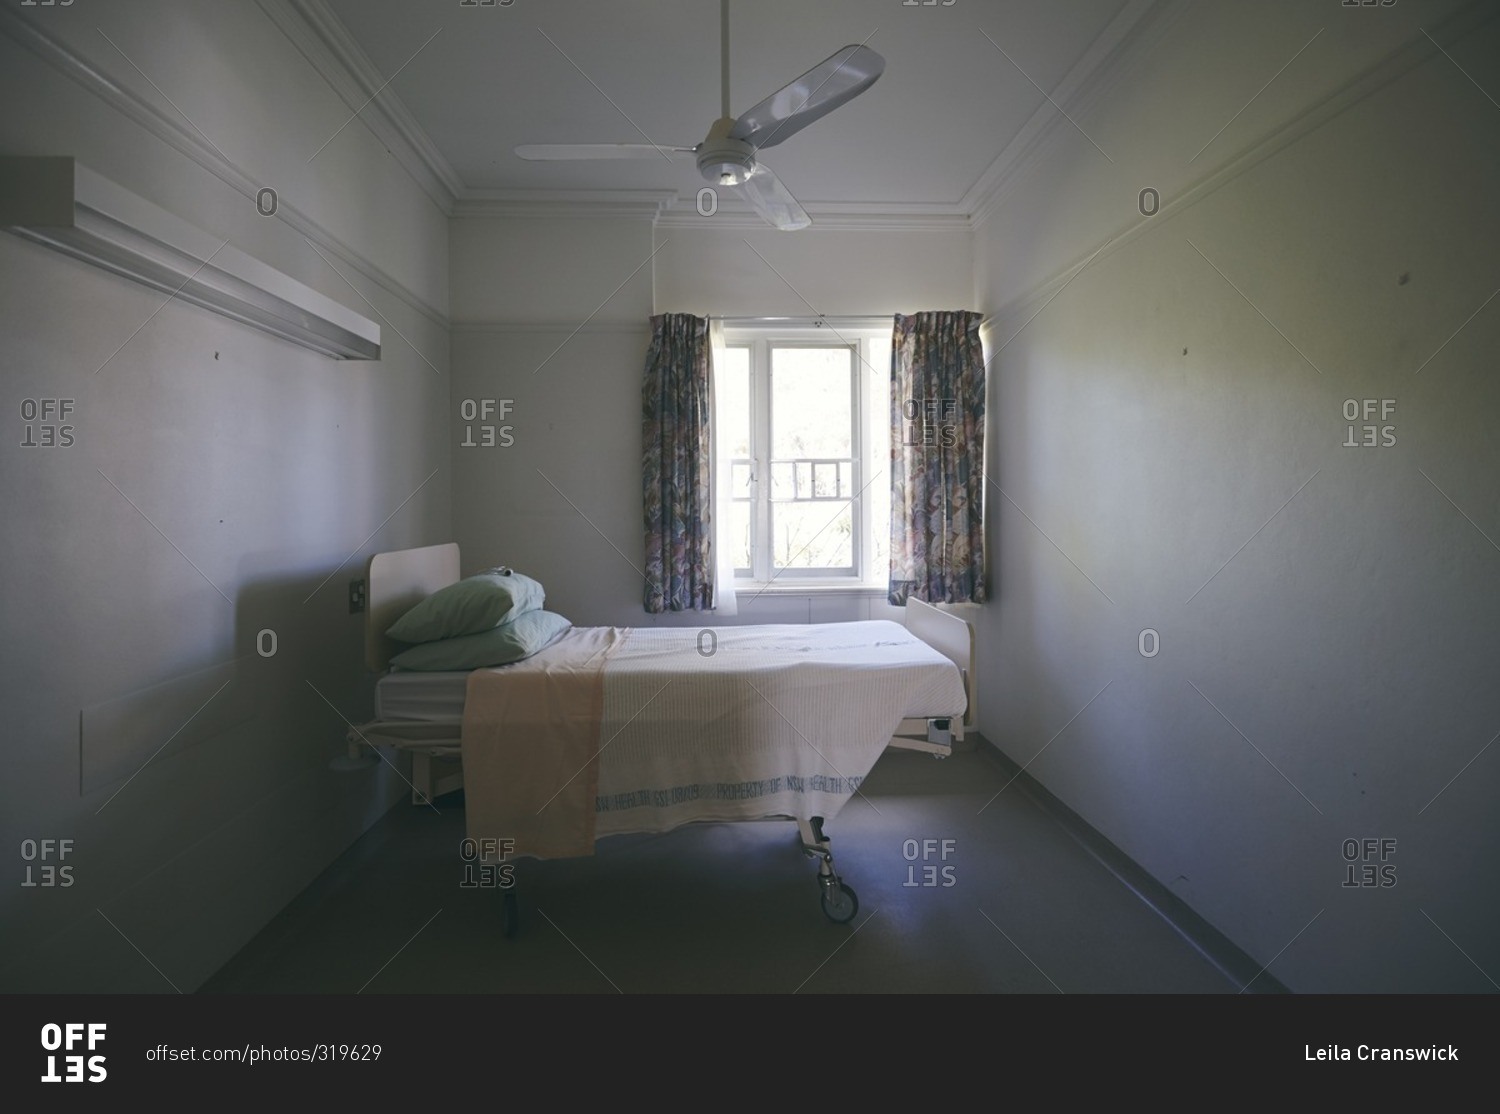 Wide angle view of a single room in an Australian nursing home